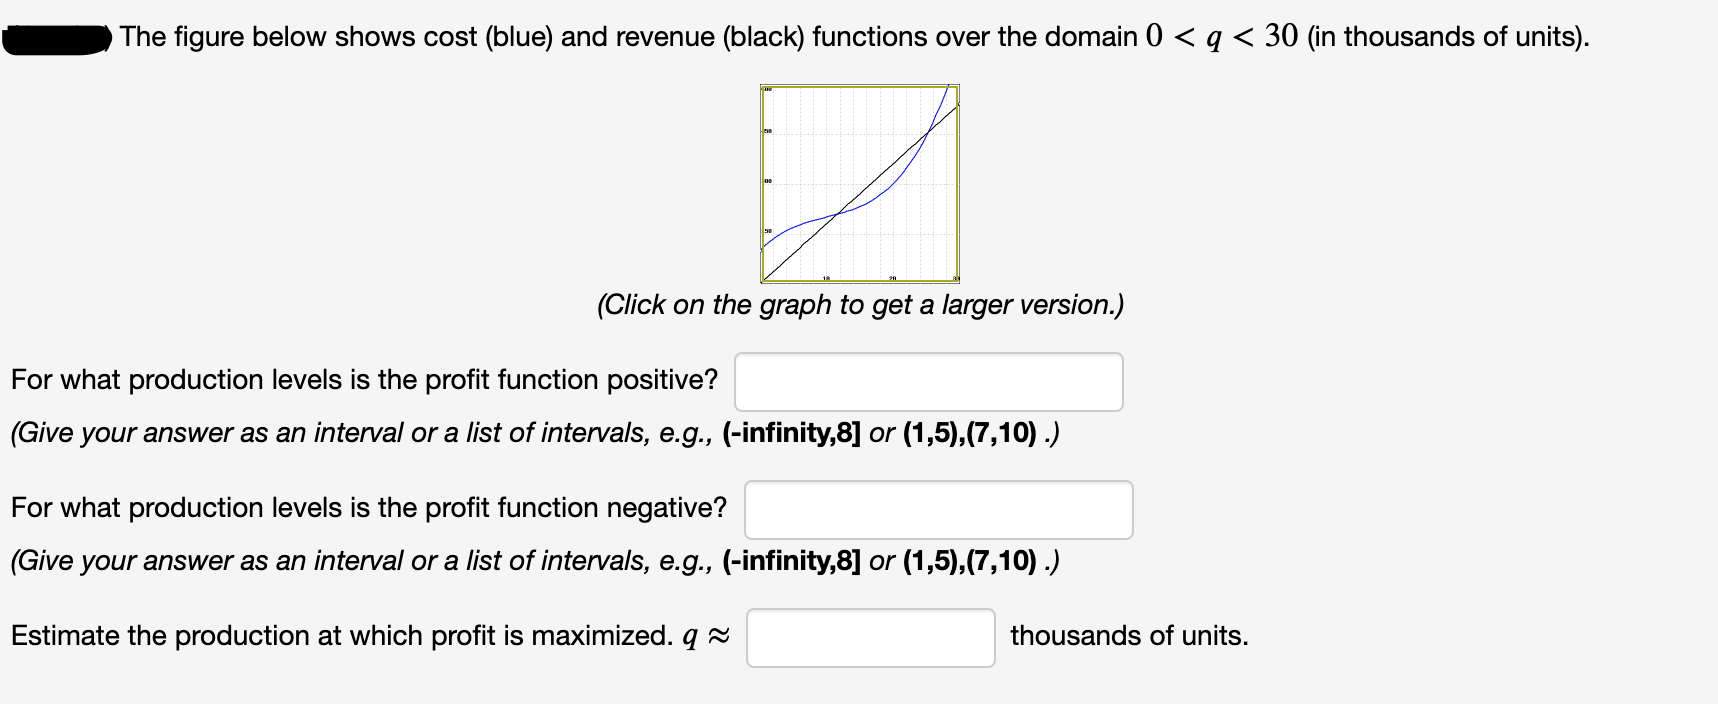 The figure below shows cost (blue) and revenue (black) functions over the domain 0 < q < 30 (in thousands of units).
(Click on the graph to get a larger version.)
For what production levels is the profit function positive?
(Give your answer as an interval or a list of intervals, e.g., (-infinity,8] or (1,5),(7,10) .)
For what production levels is the profit function negative?
(Give your answer as an interval or a list of intervals, e.g., (-infinity,8] or (1,5),(7,10) .)
Estimate the production at which profit is maximized. q 2
thousands of units.
